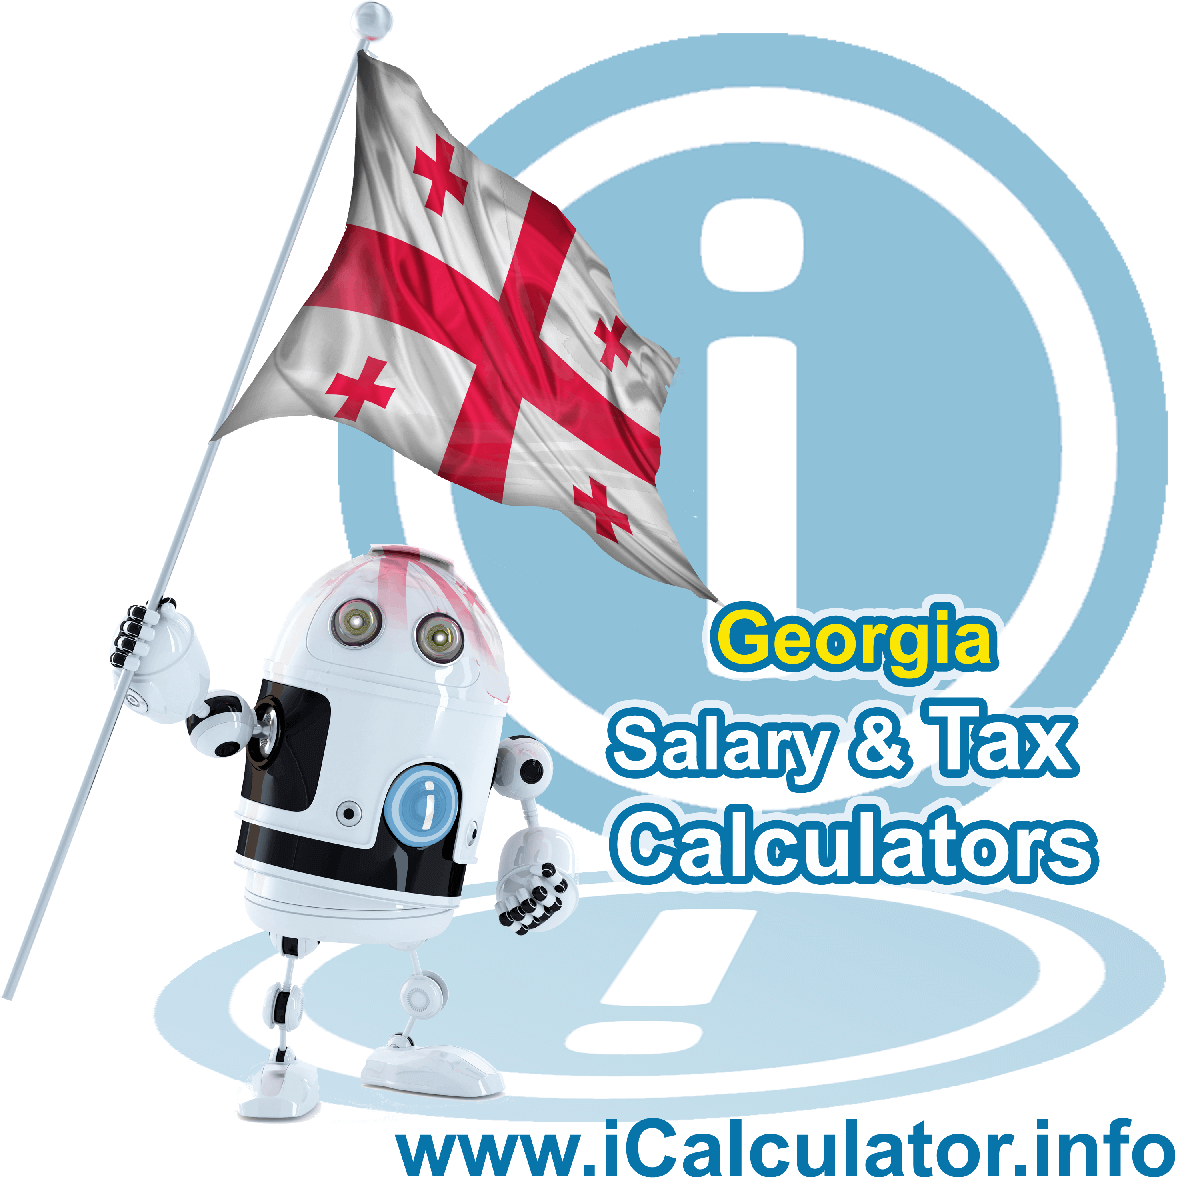 Georgia Salary Calculator. This image shows the Georgiaese flag and information relating to the tax formula for the Georgia Tax Calculator